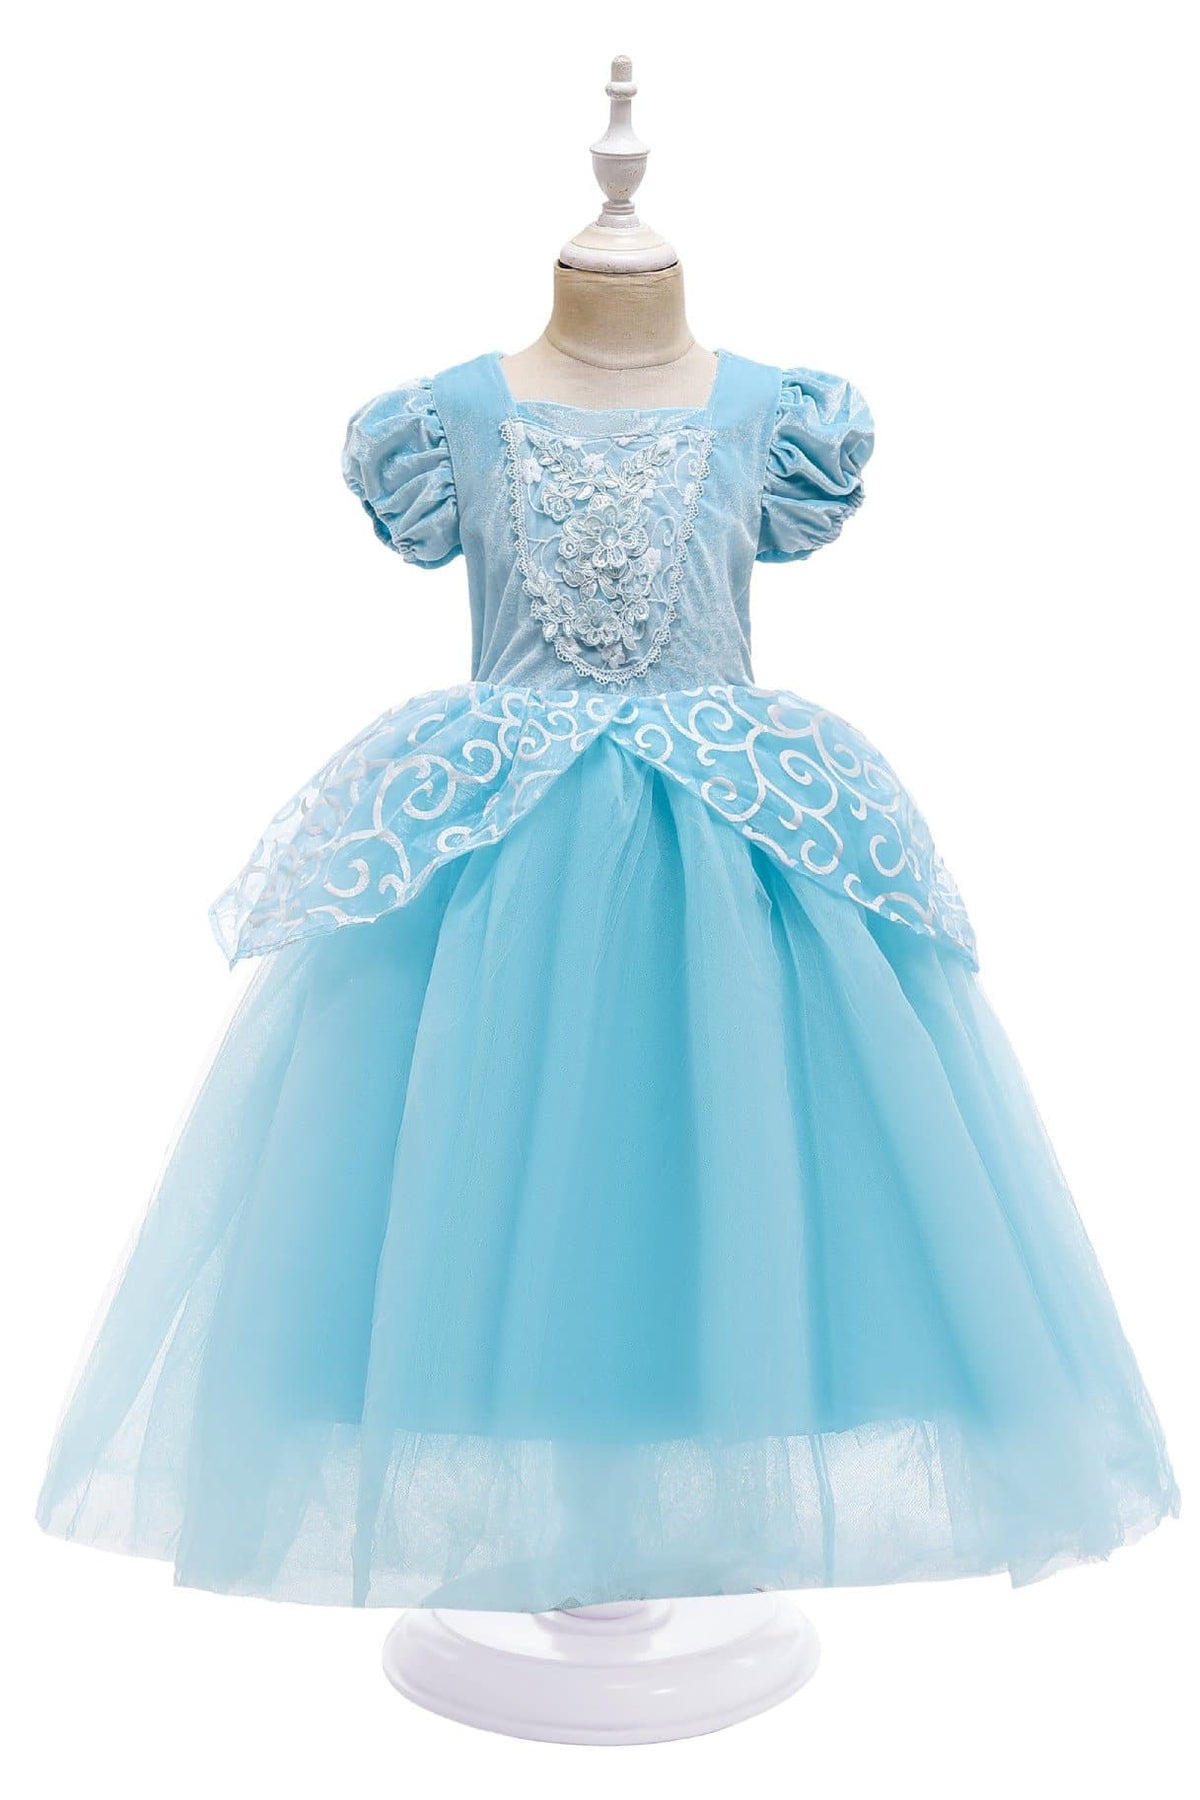 Cinderella Dress Costume For Toddlers Girls